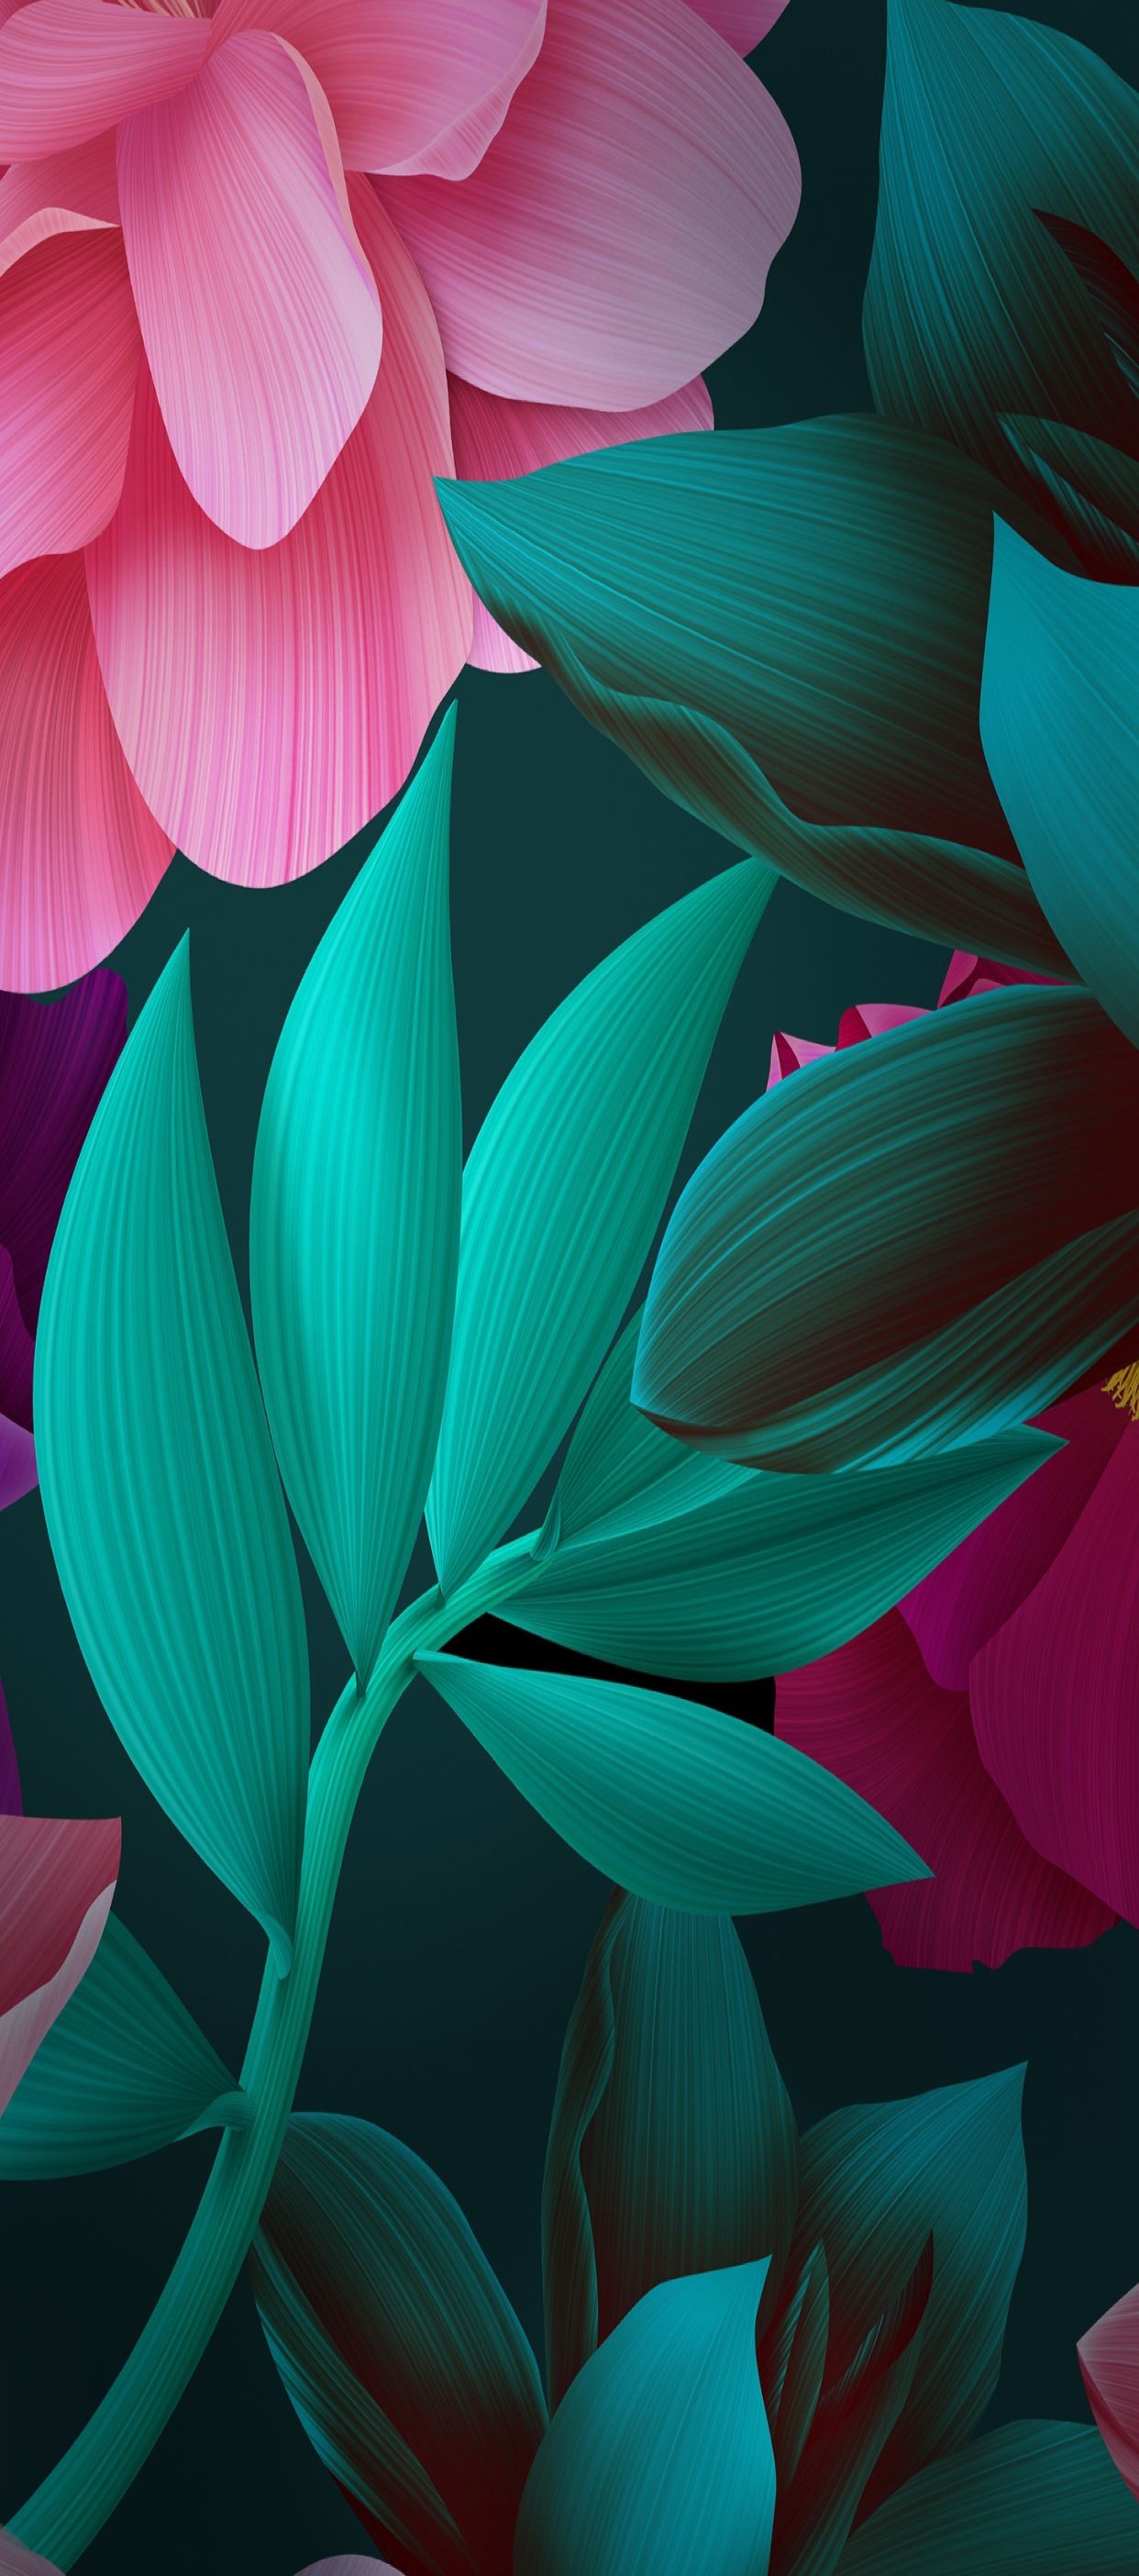 1242x2808 iOS 11, iPhone X, green, black, pink, floral, plant, simple, abstract,  apple, wallpaper, iphone 8, clean, beauty, colour, iOS, minimal